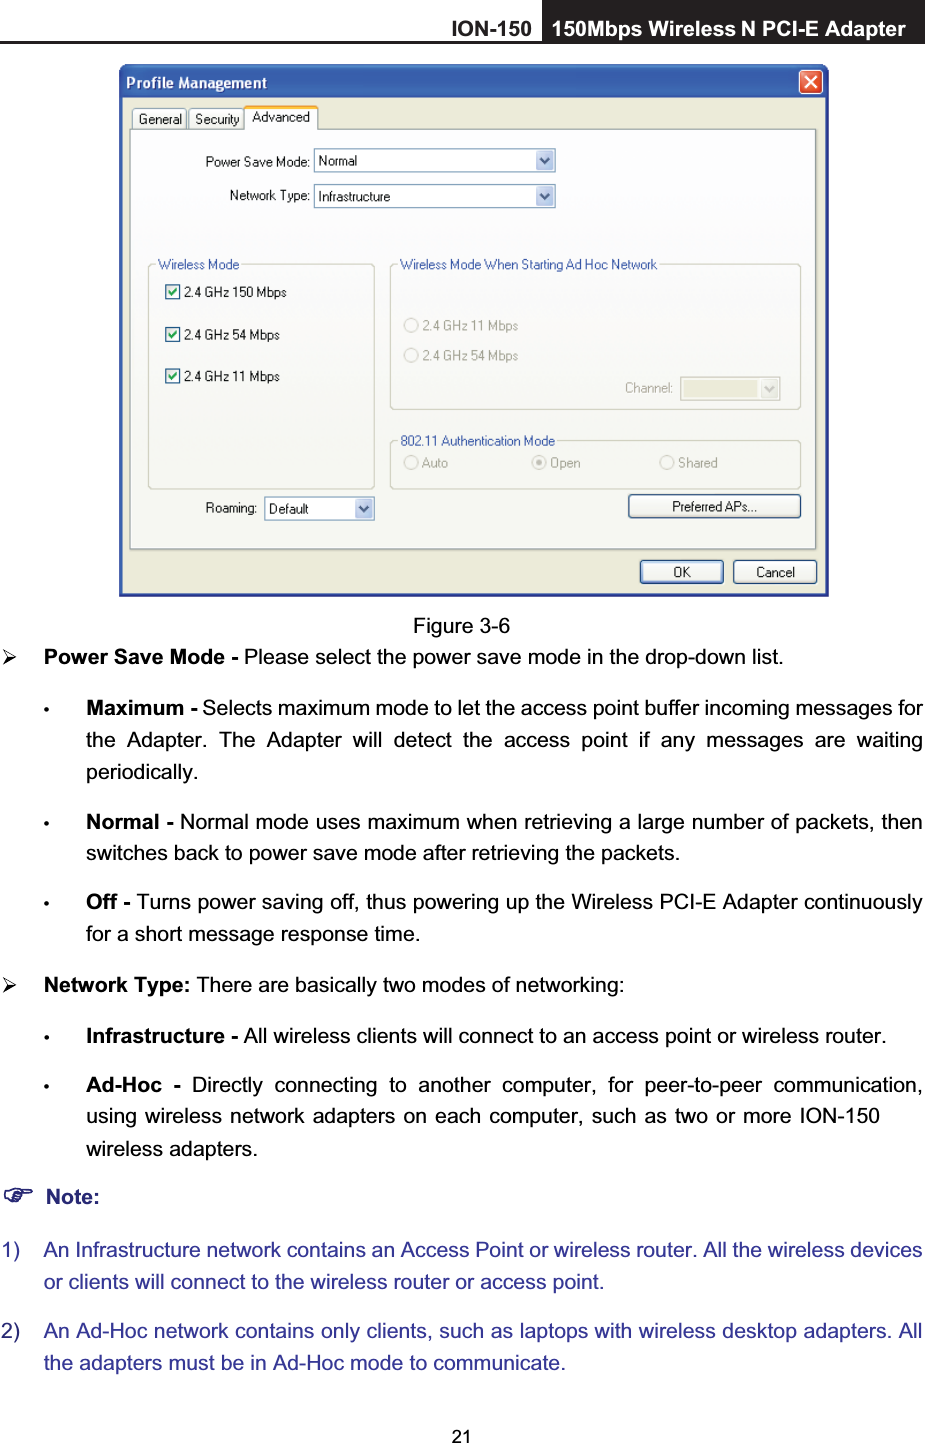 21Figure 3-6 Power Save Mode - Please select the power save mode in the drop-down list.tMaximum - Selects maximum mode to let the access point buffer incoming messages for the Adapter. The Adapter will detect the access point if any messages are waiting periodically. tNormal - Normal mode uses maximum when retrieving a large number of packets, then switches back to power save mode after retrieving the packets. tOff - Turns power saving off, thus powering up the Wireless PCI-E Adapter continuously for a short message response time. Network Type: There are basically two modes of networking: tInfrastructure - All wireless clients will connect to an access point or wireless router. tAd-Hoc - Directly connecting to another computer, for peer-to-peer communication, using wireless network adapters on each computer, such as two or more ION-150  wireless adapters. Note:1)  An Infrastructure network contains an Access Point or wireless router. All the wireless devices or clients will connect to the wireless router or access point. 2) An Ad-Hoc network contains only clients, such as laptops with wireless desktop adapters. All the adapters must be in Ad-Hoc mode to communicate.ION-150 150Mbps Wireless  N PCI-E Adapter